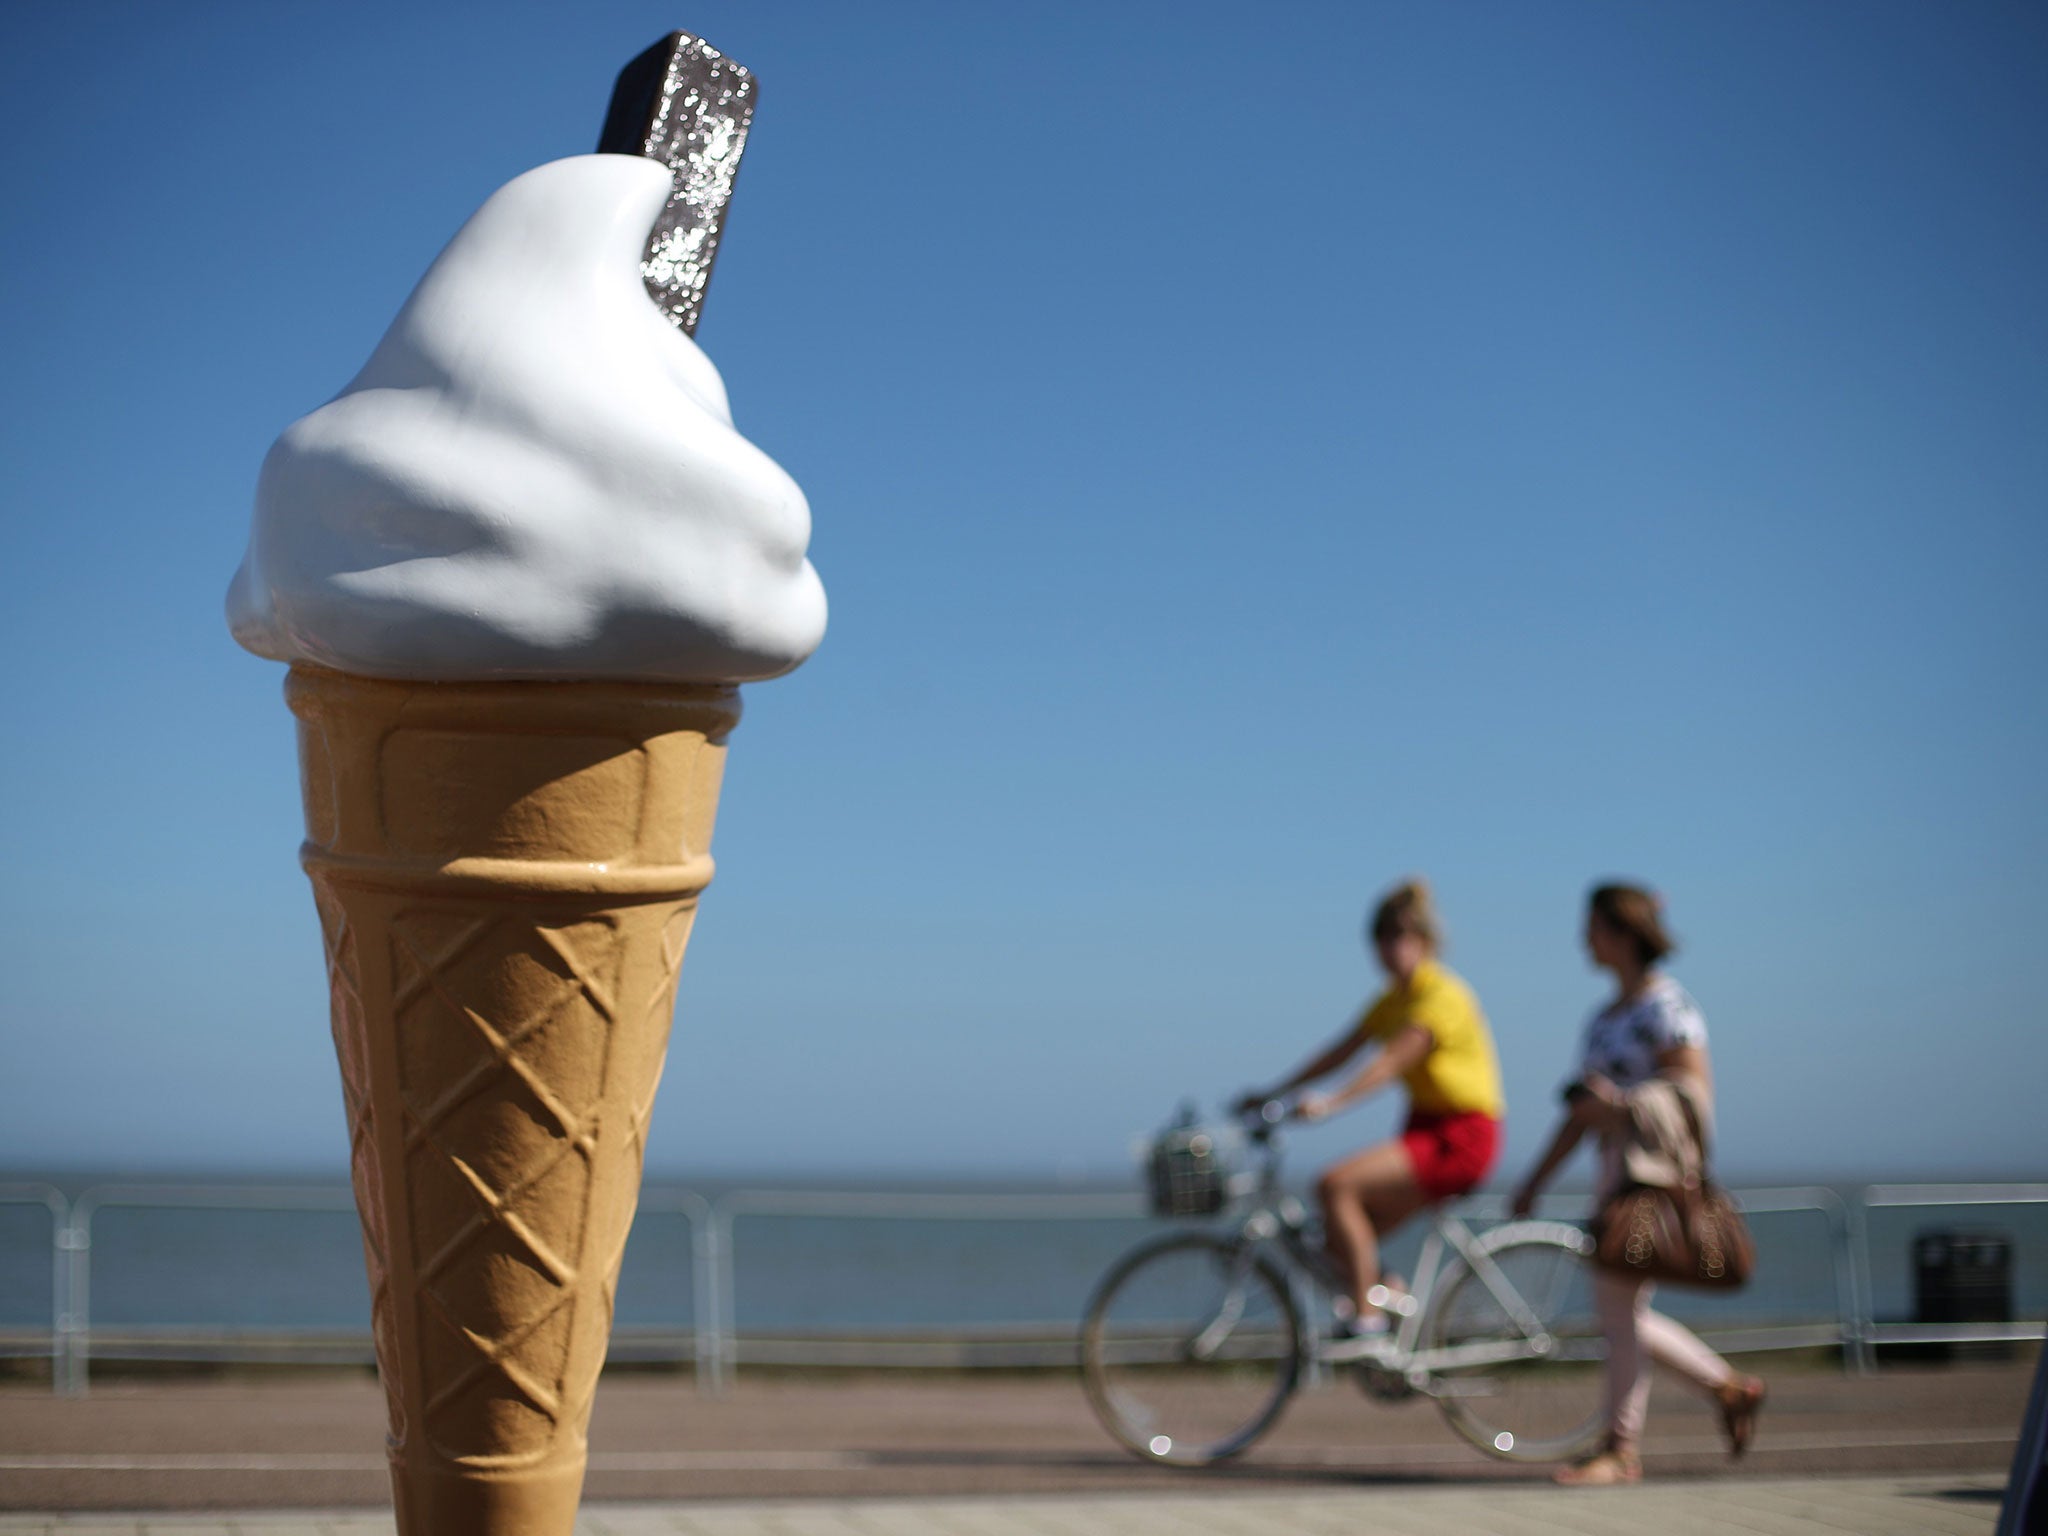 There will be warm, pleasant weather in many parts of the UK on Thursday and over the weekend